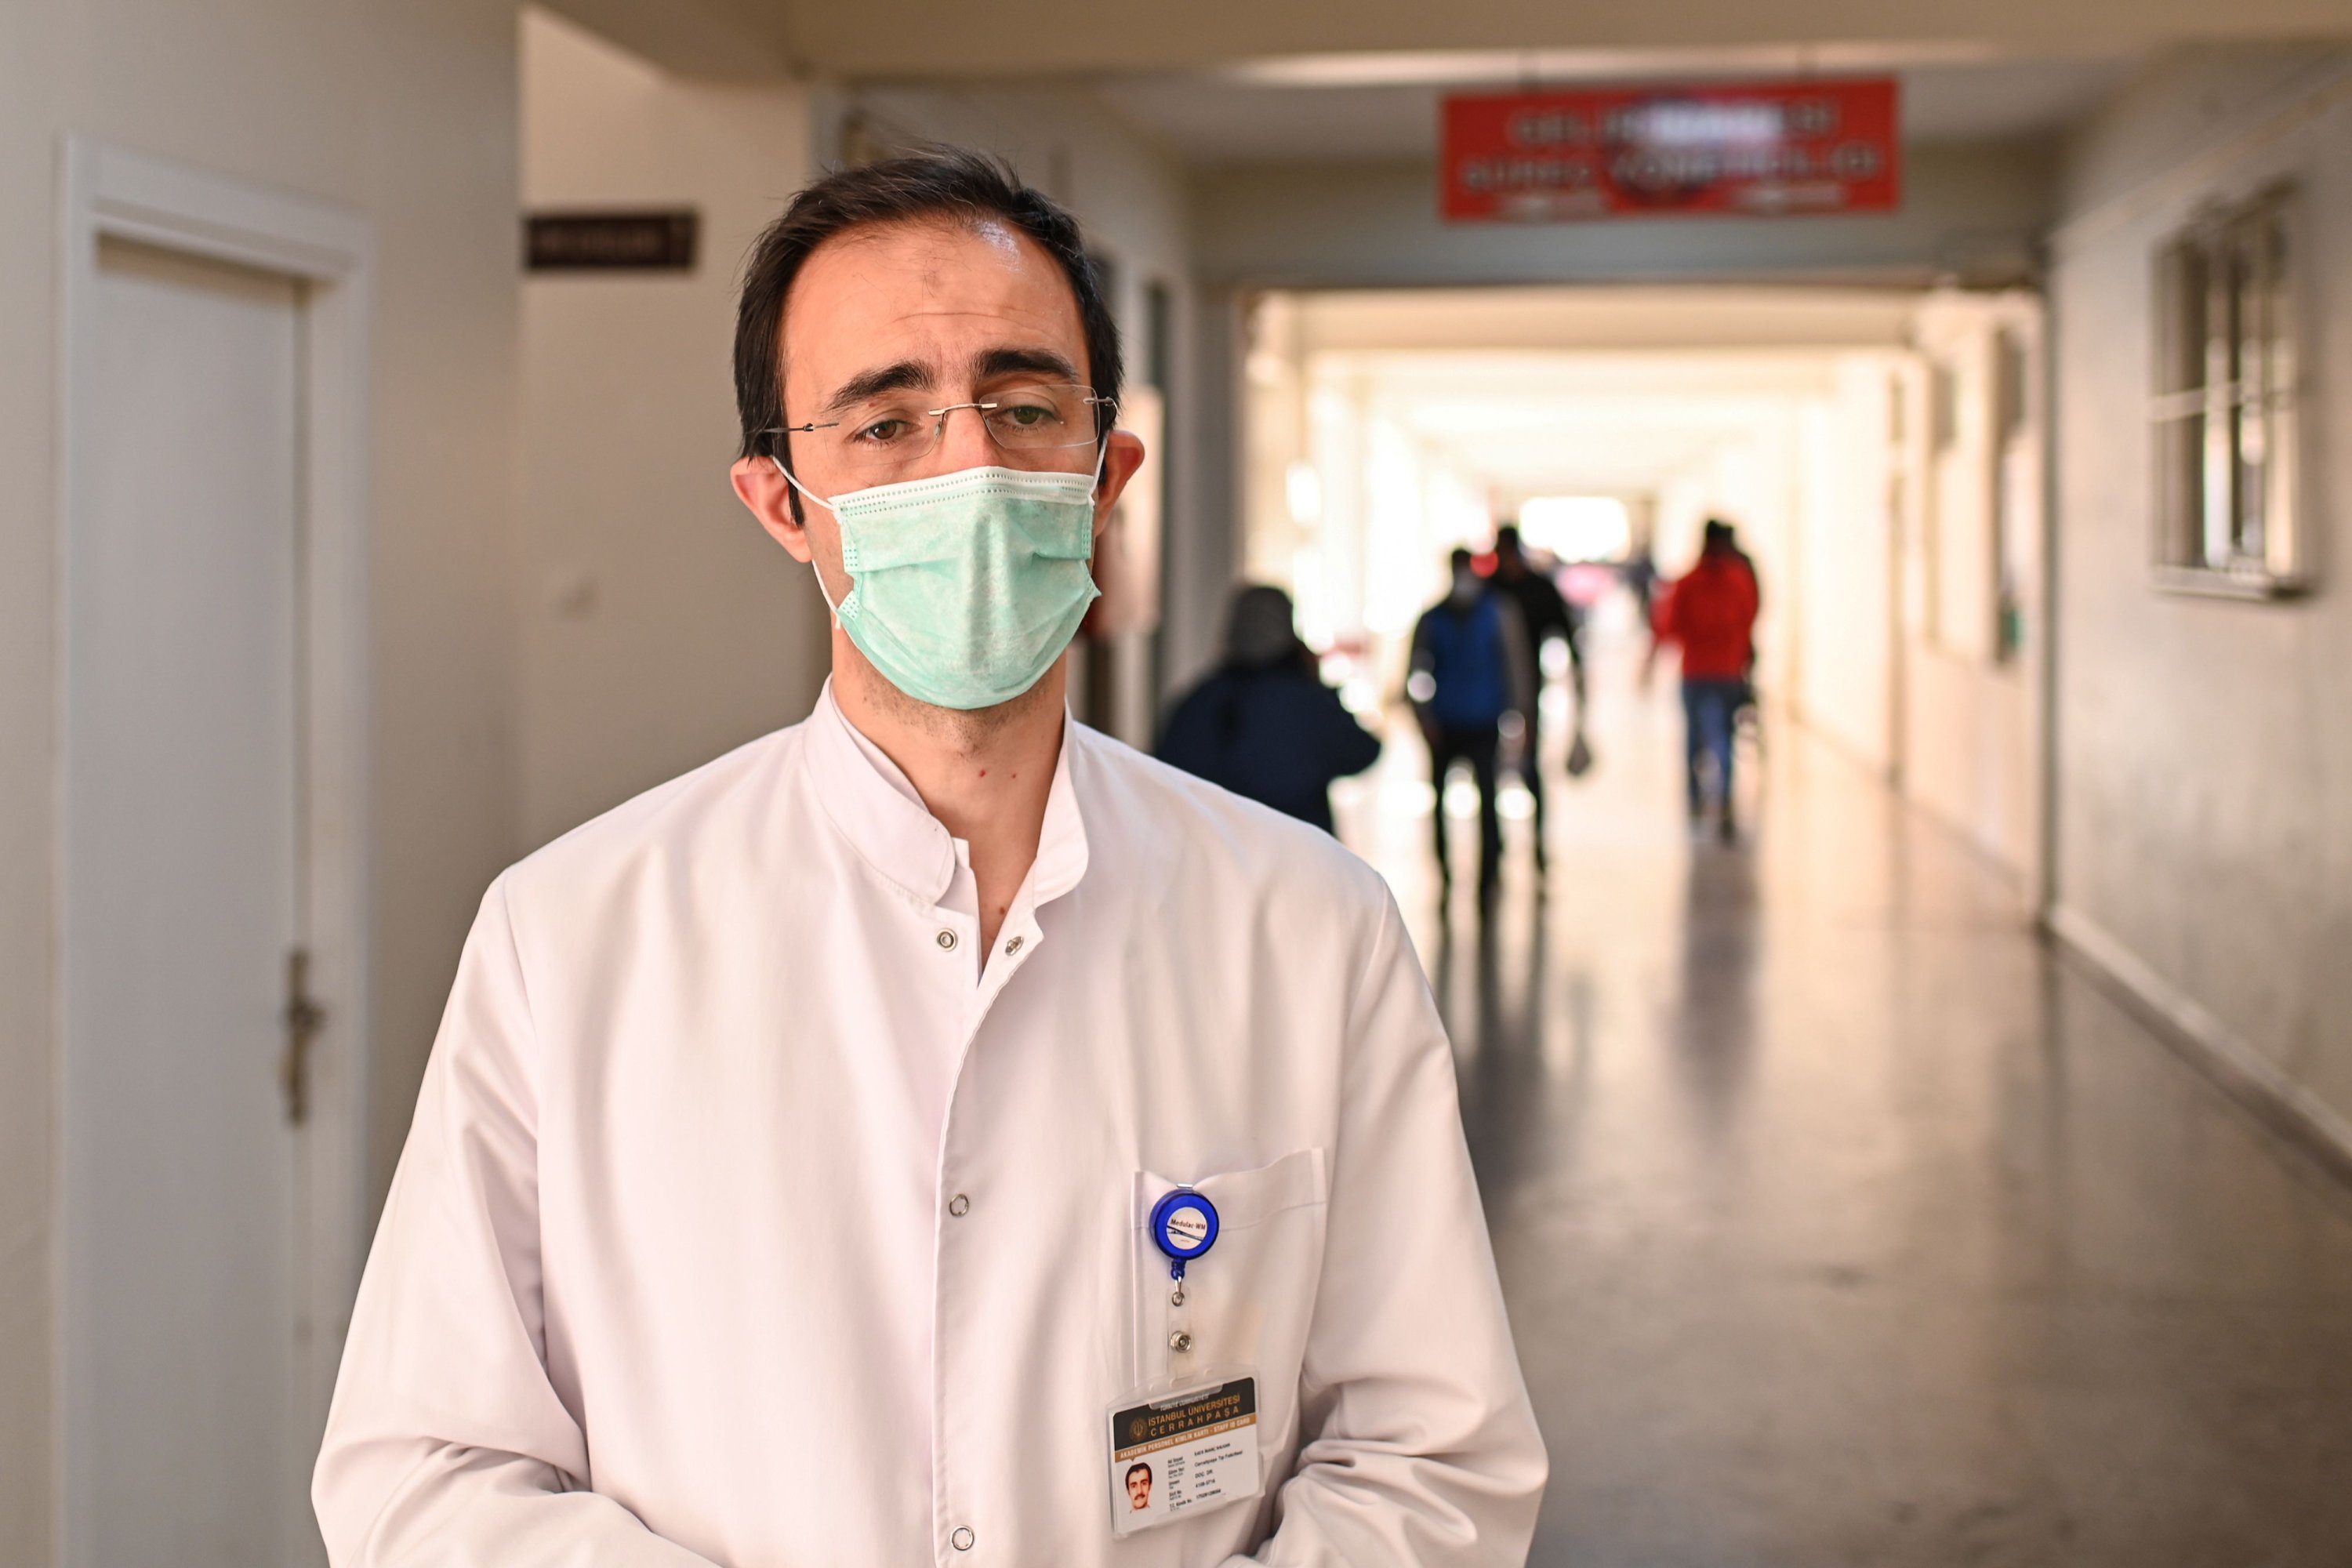 Associate professor Ilker Inanç Balkan, 44, who treats COVID-19 patients, poses during an interview.